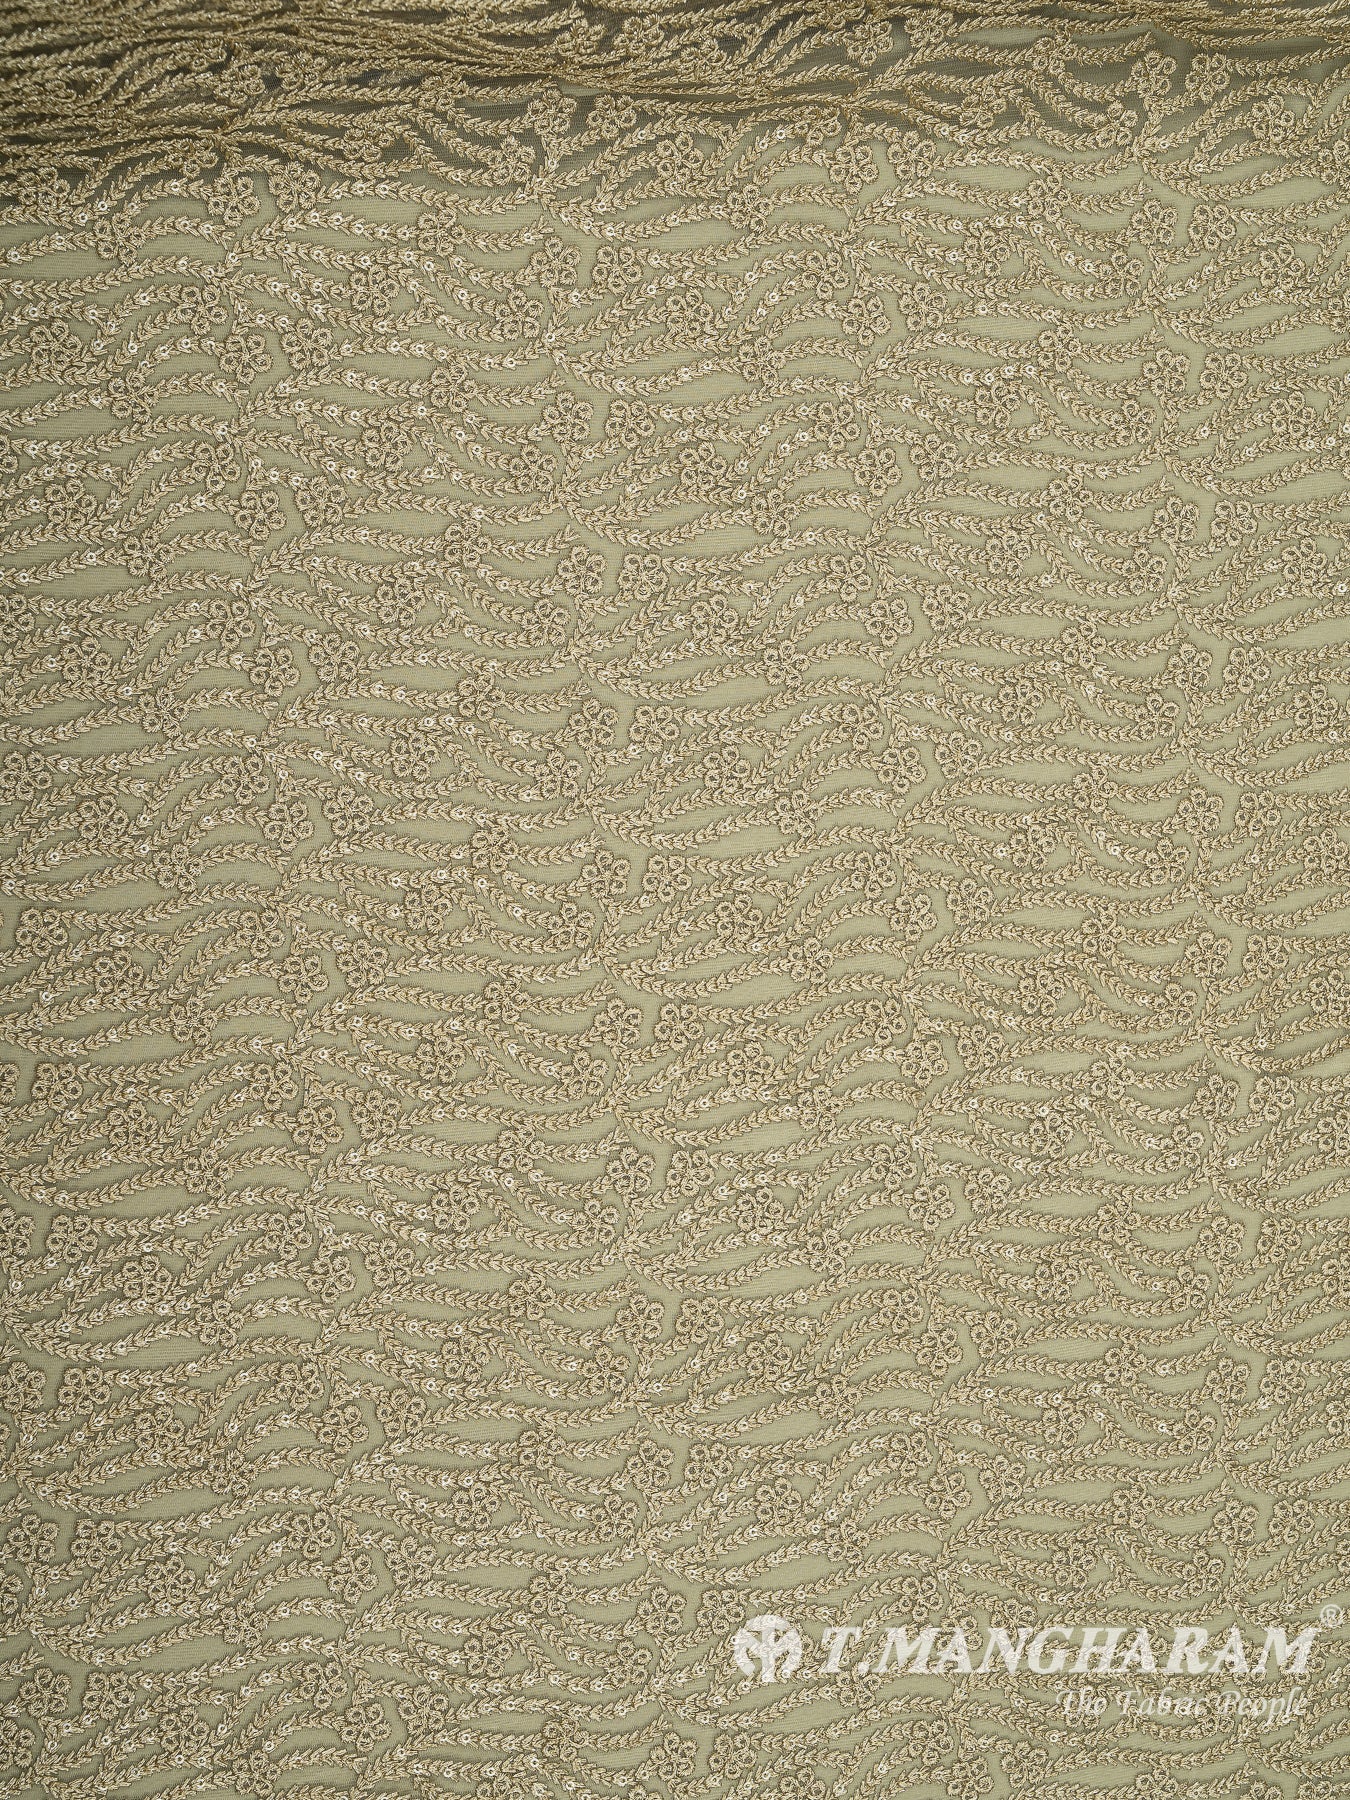 Green Net Embroidery Fabric - EC8427 view-3